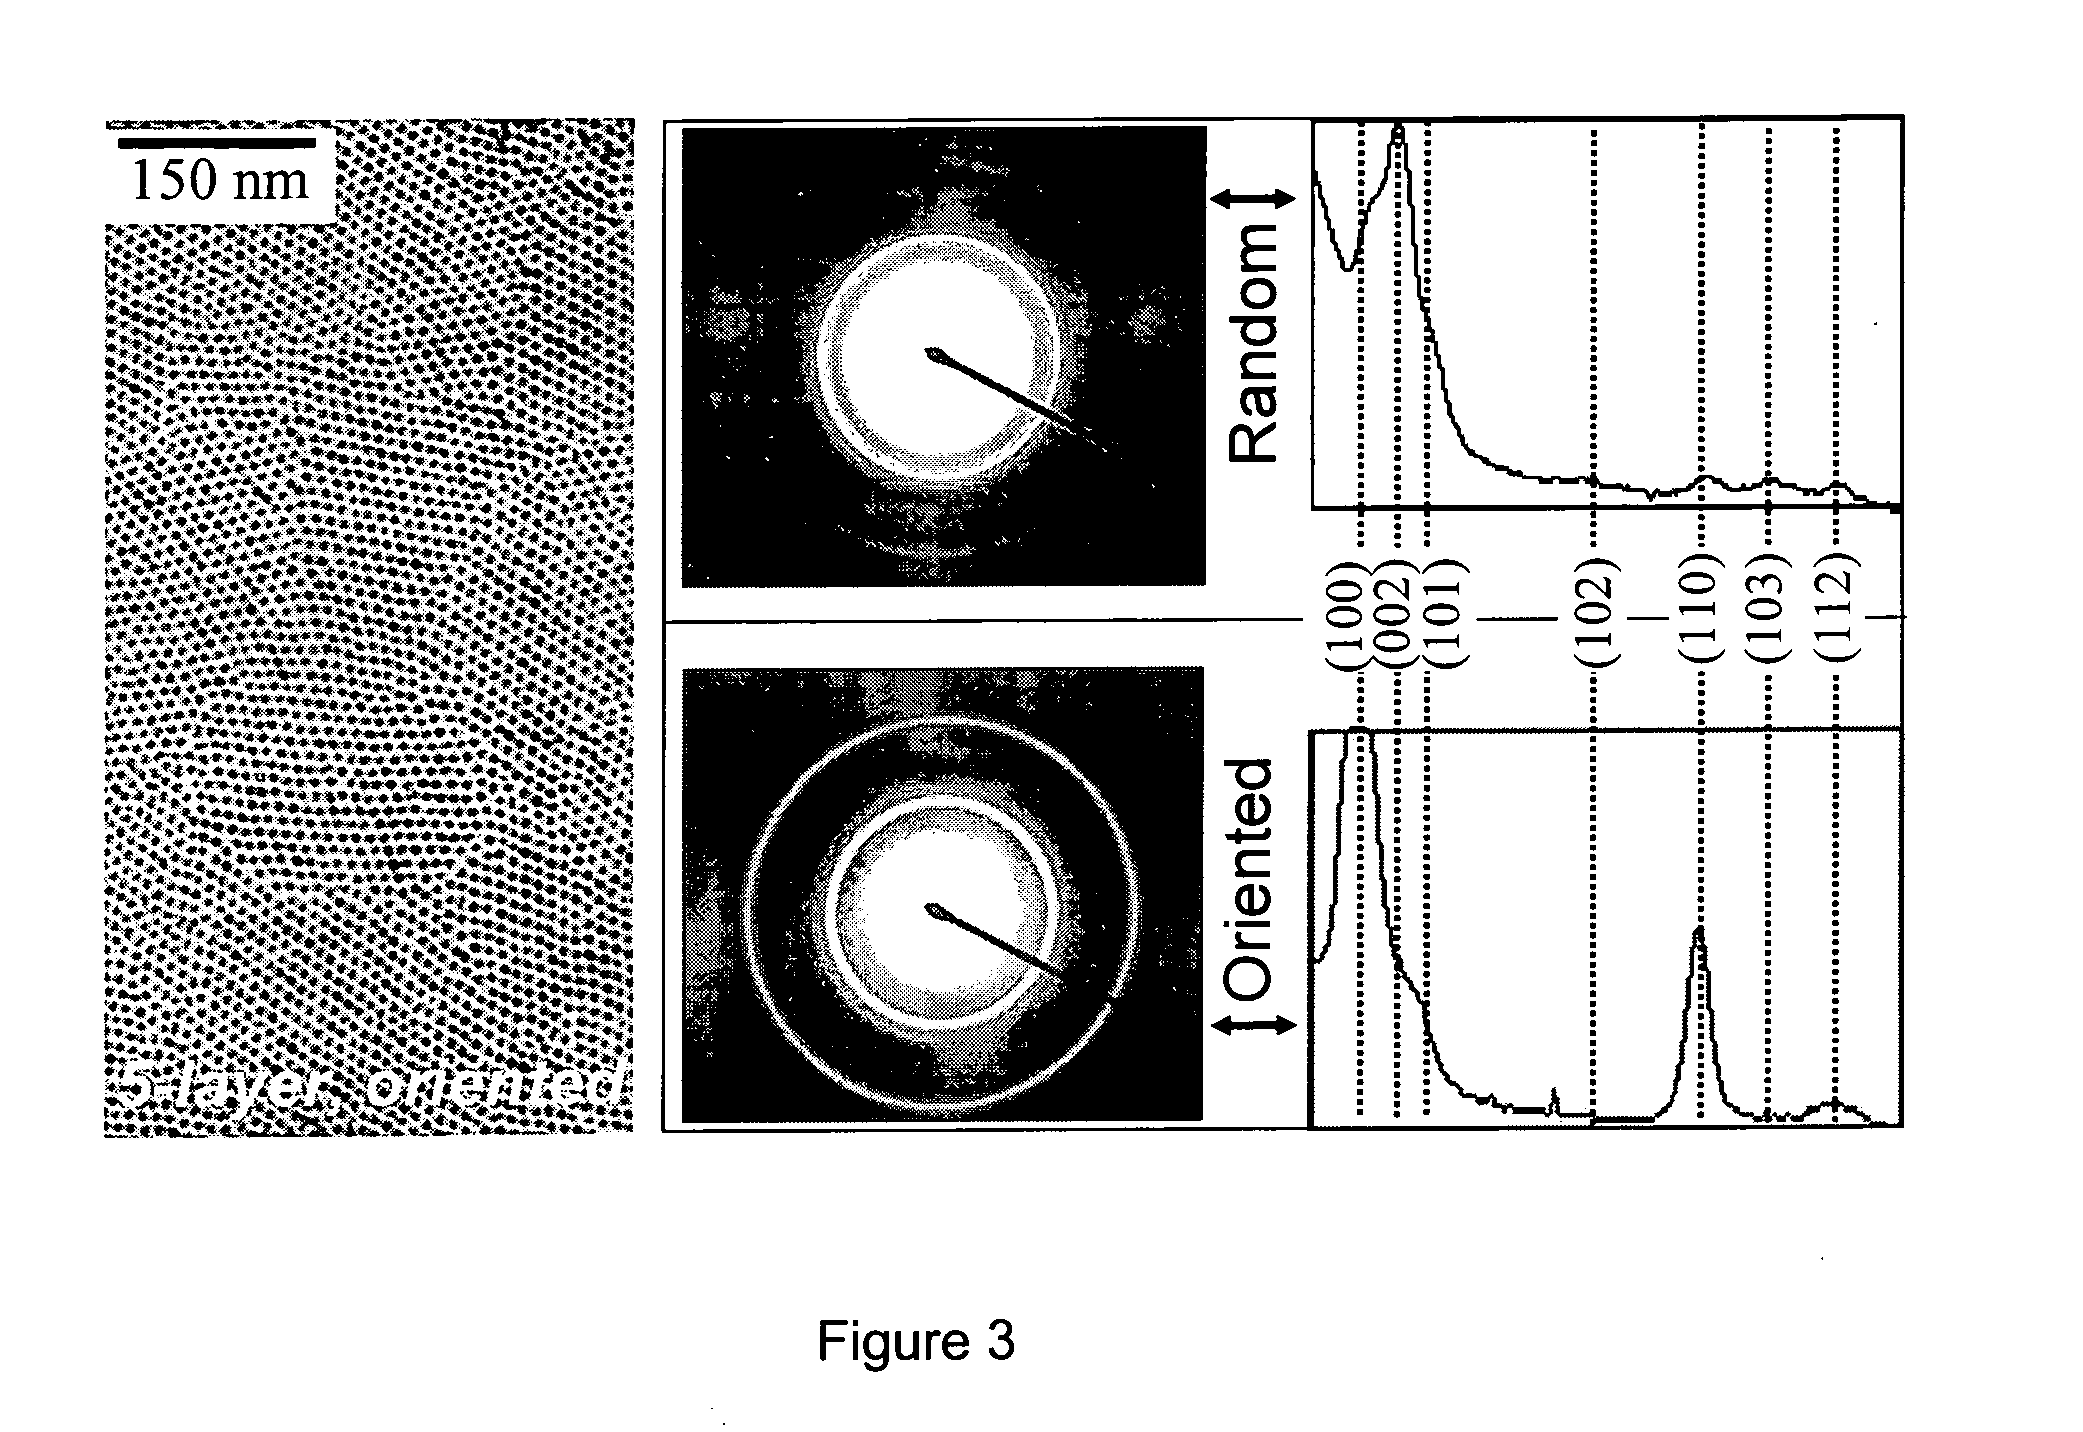 Monodisperse core/shell and other complex structured nanocrystals and methods of preparing the same